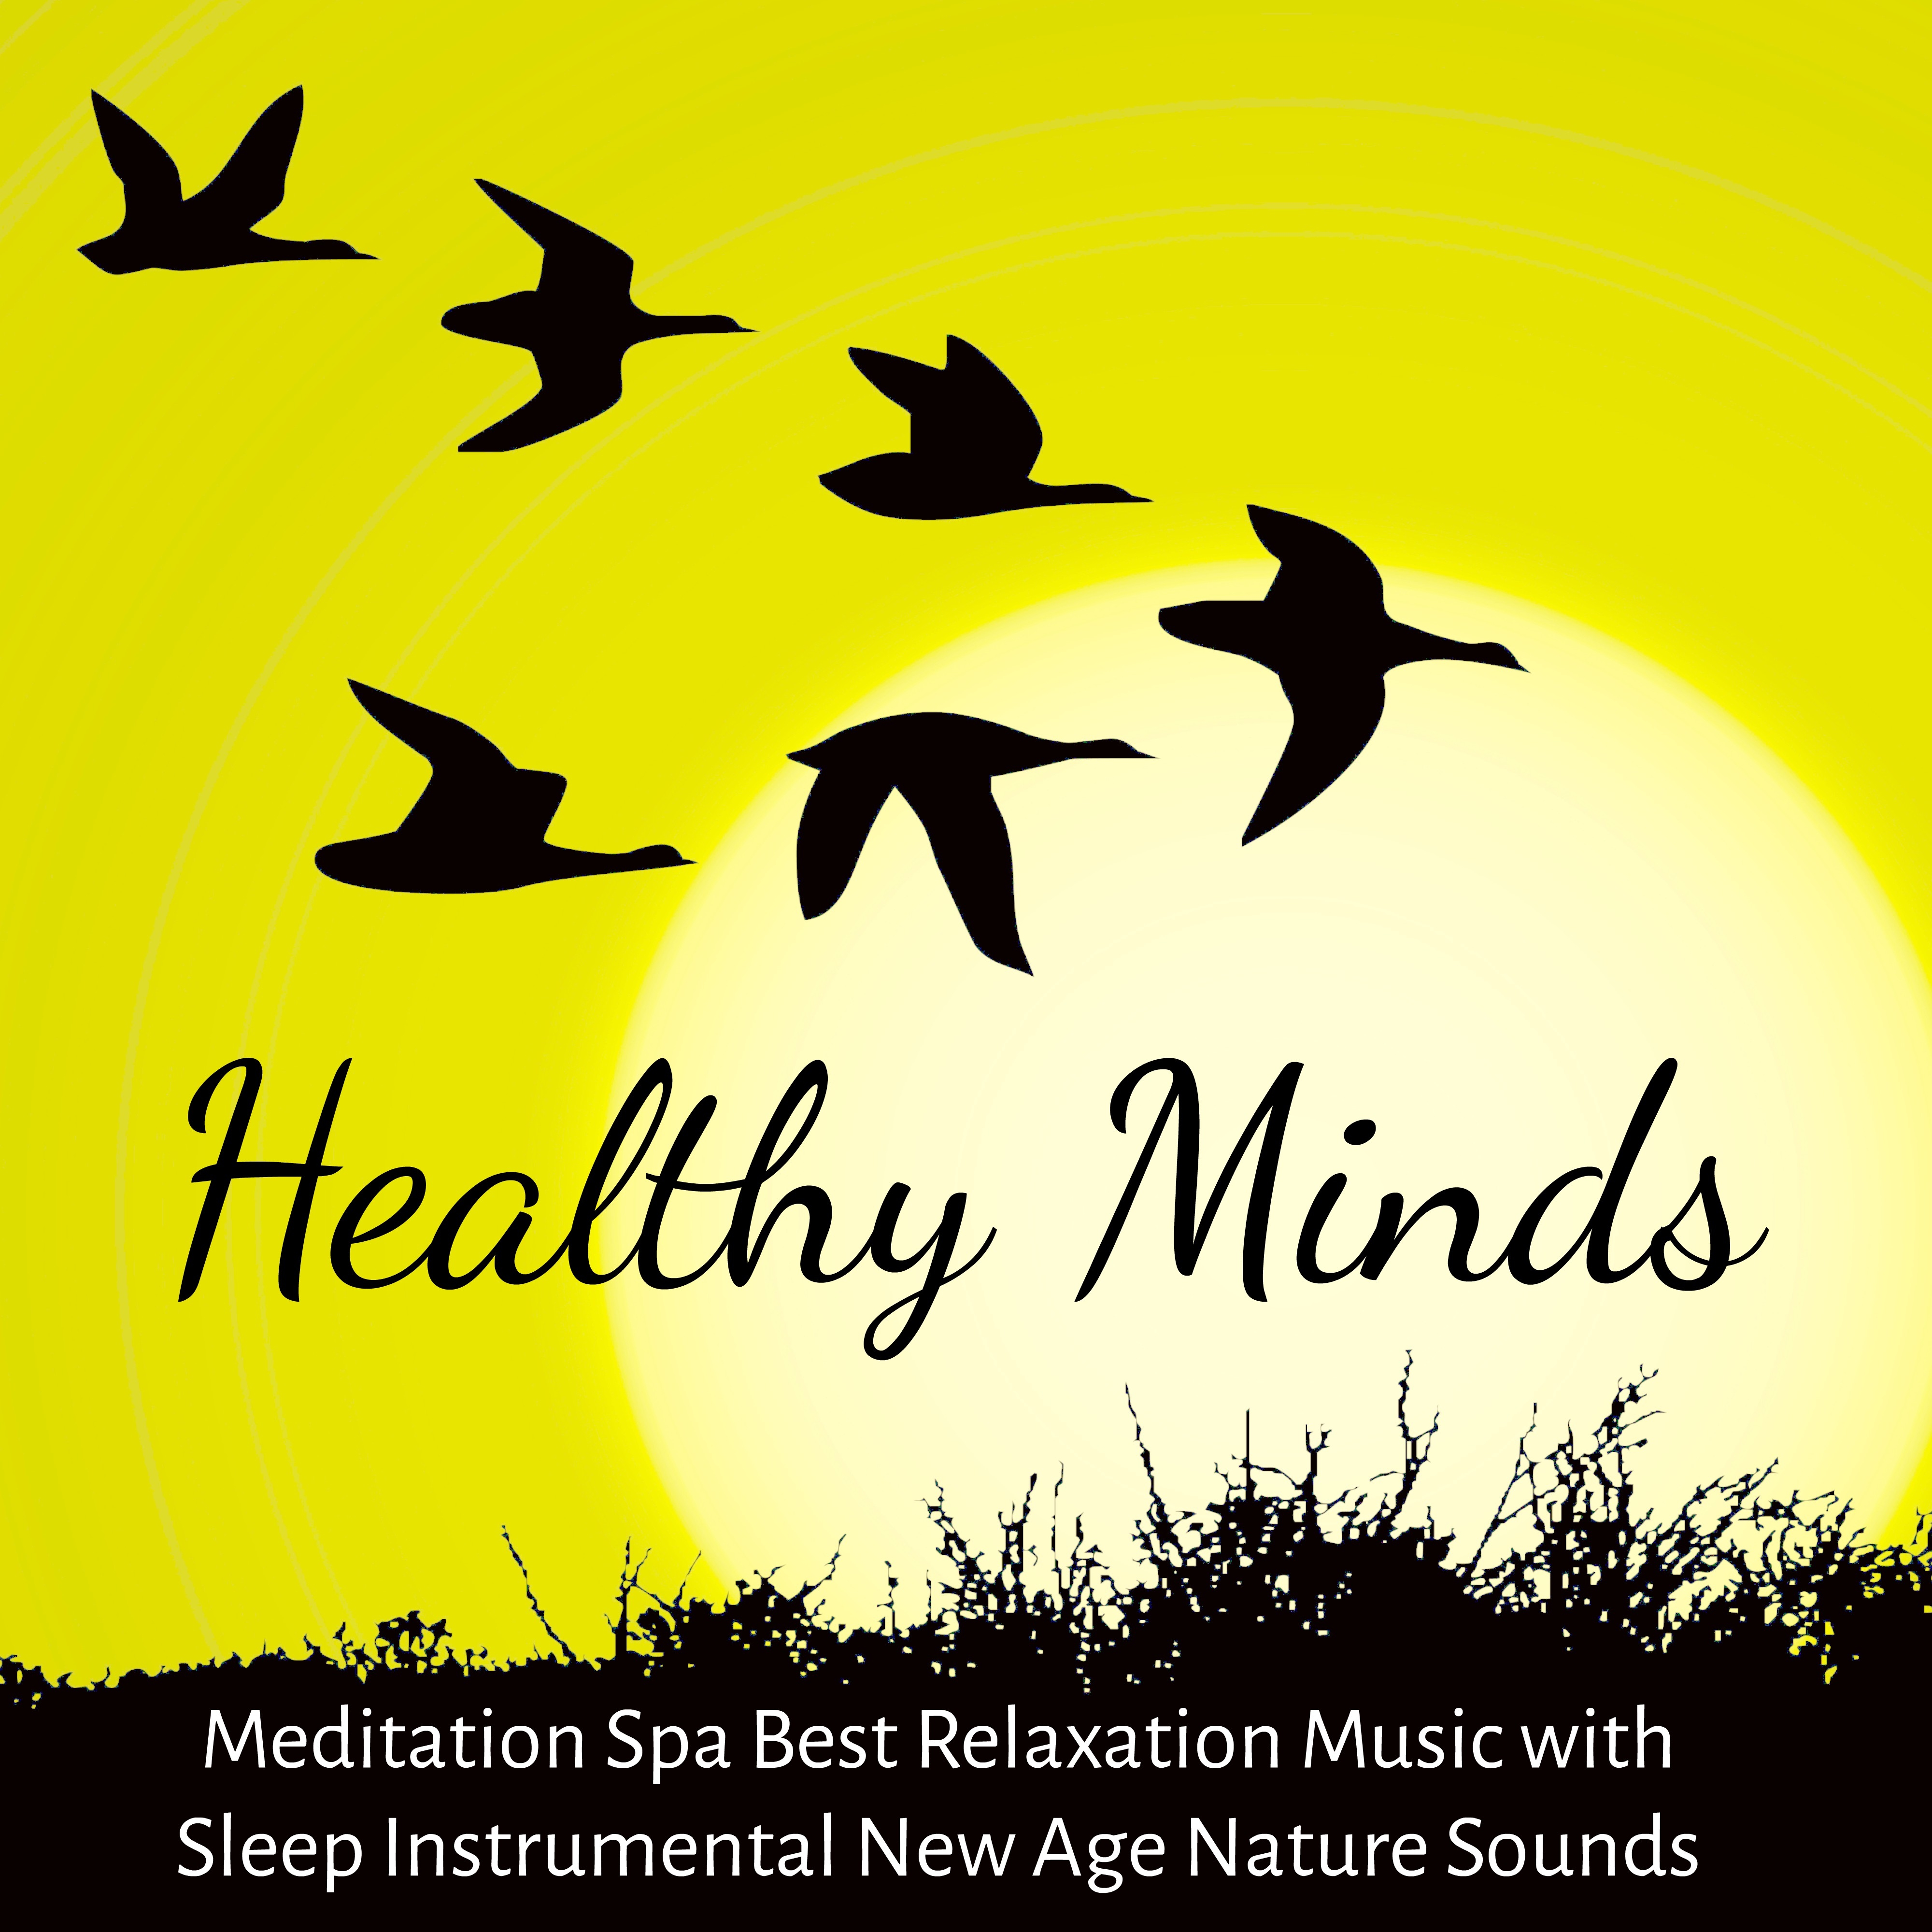 Healthy Minds - Meditation Spa Best Relaxation Music with Sleep Instrumental New Age Nature Sounds